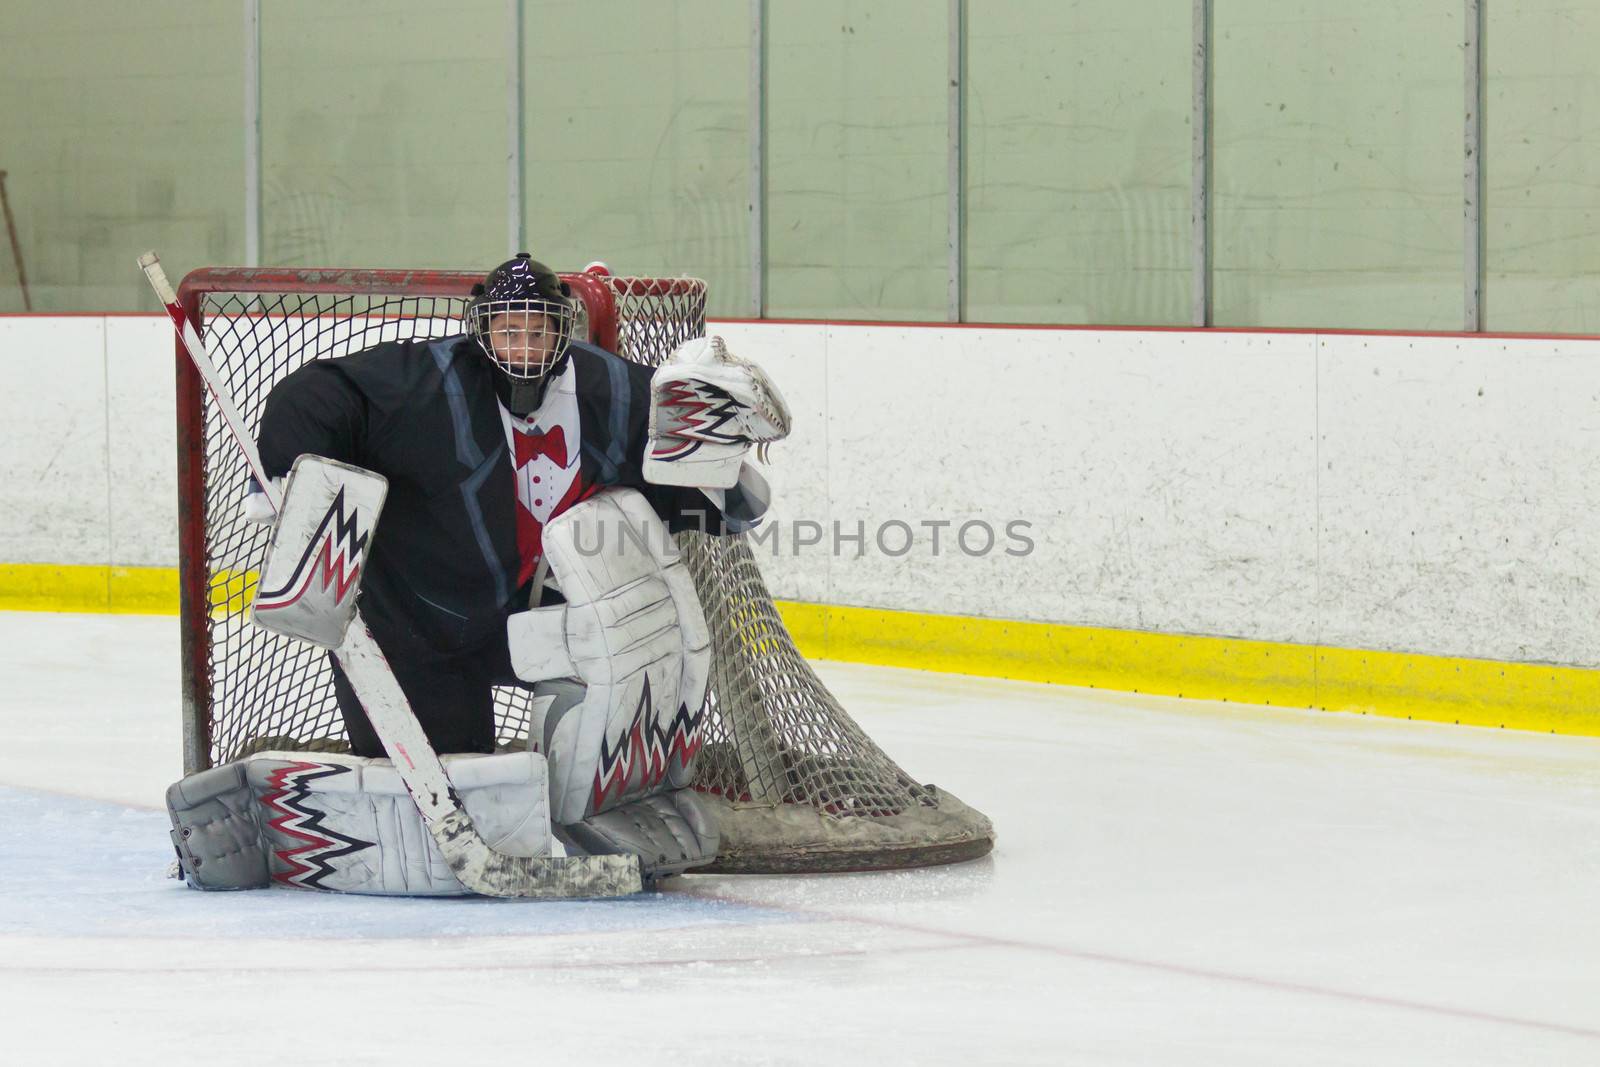 Hockey goalie ready for the puck  by bigjohn36